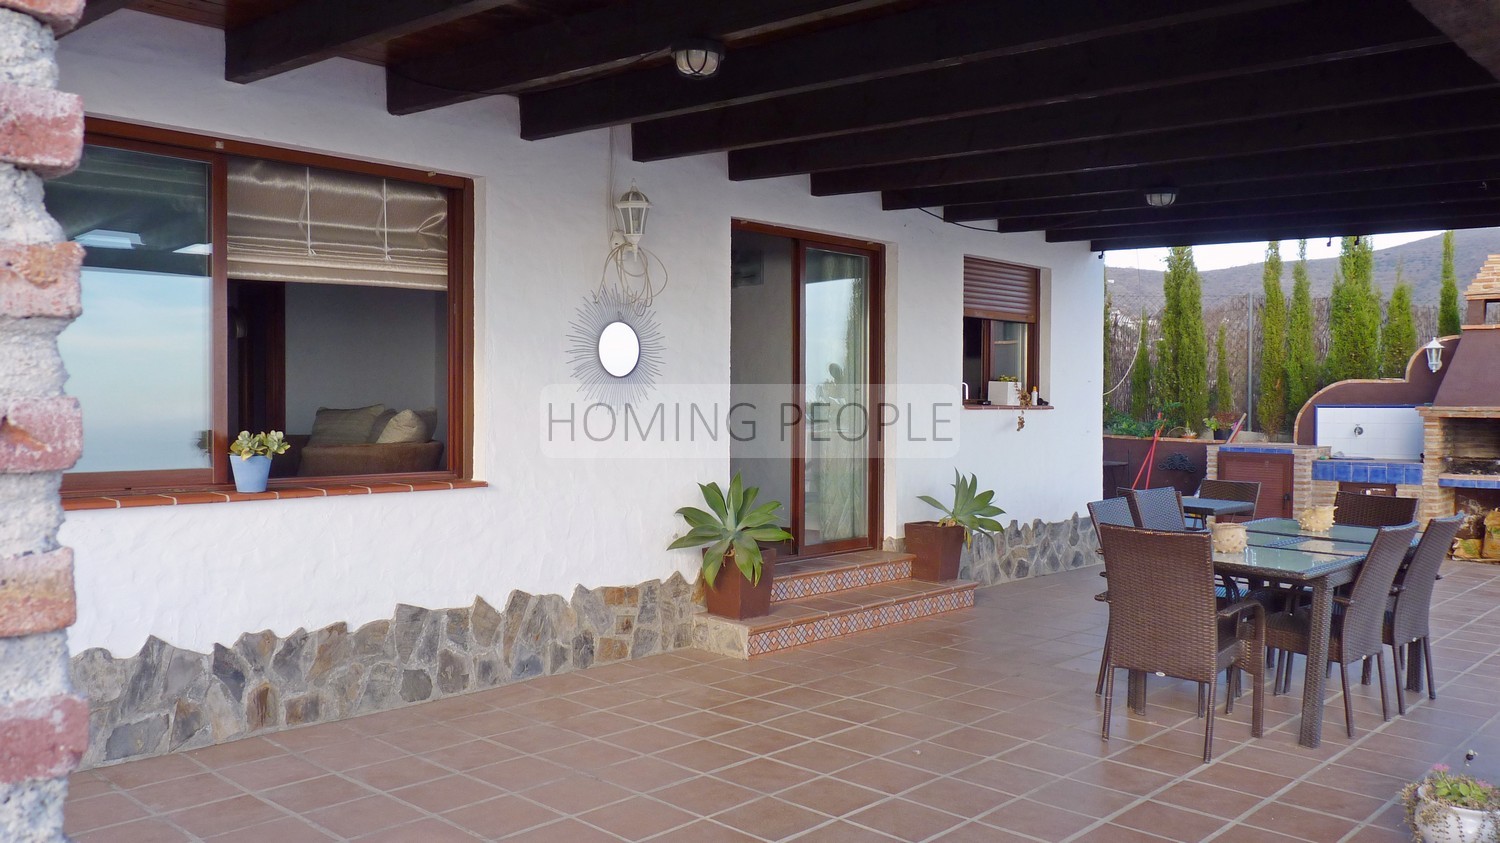 Country villa with swimming pool and guest house. Breathtaking views and good access!